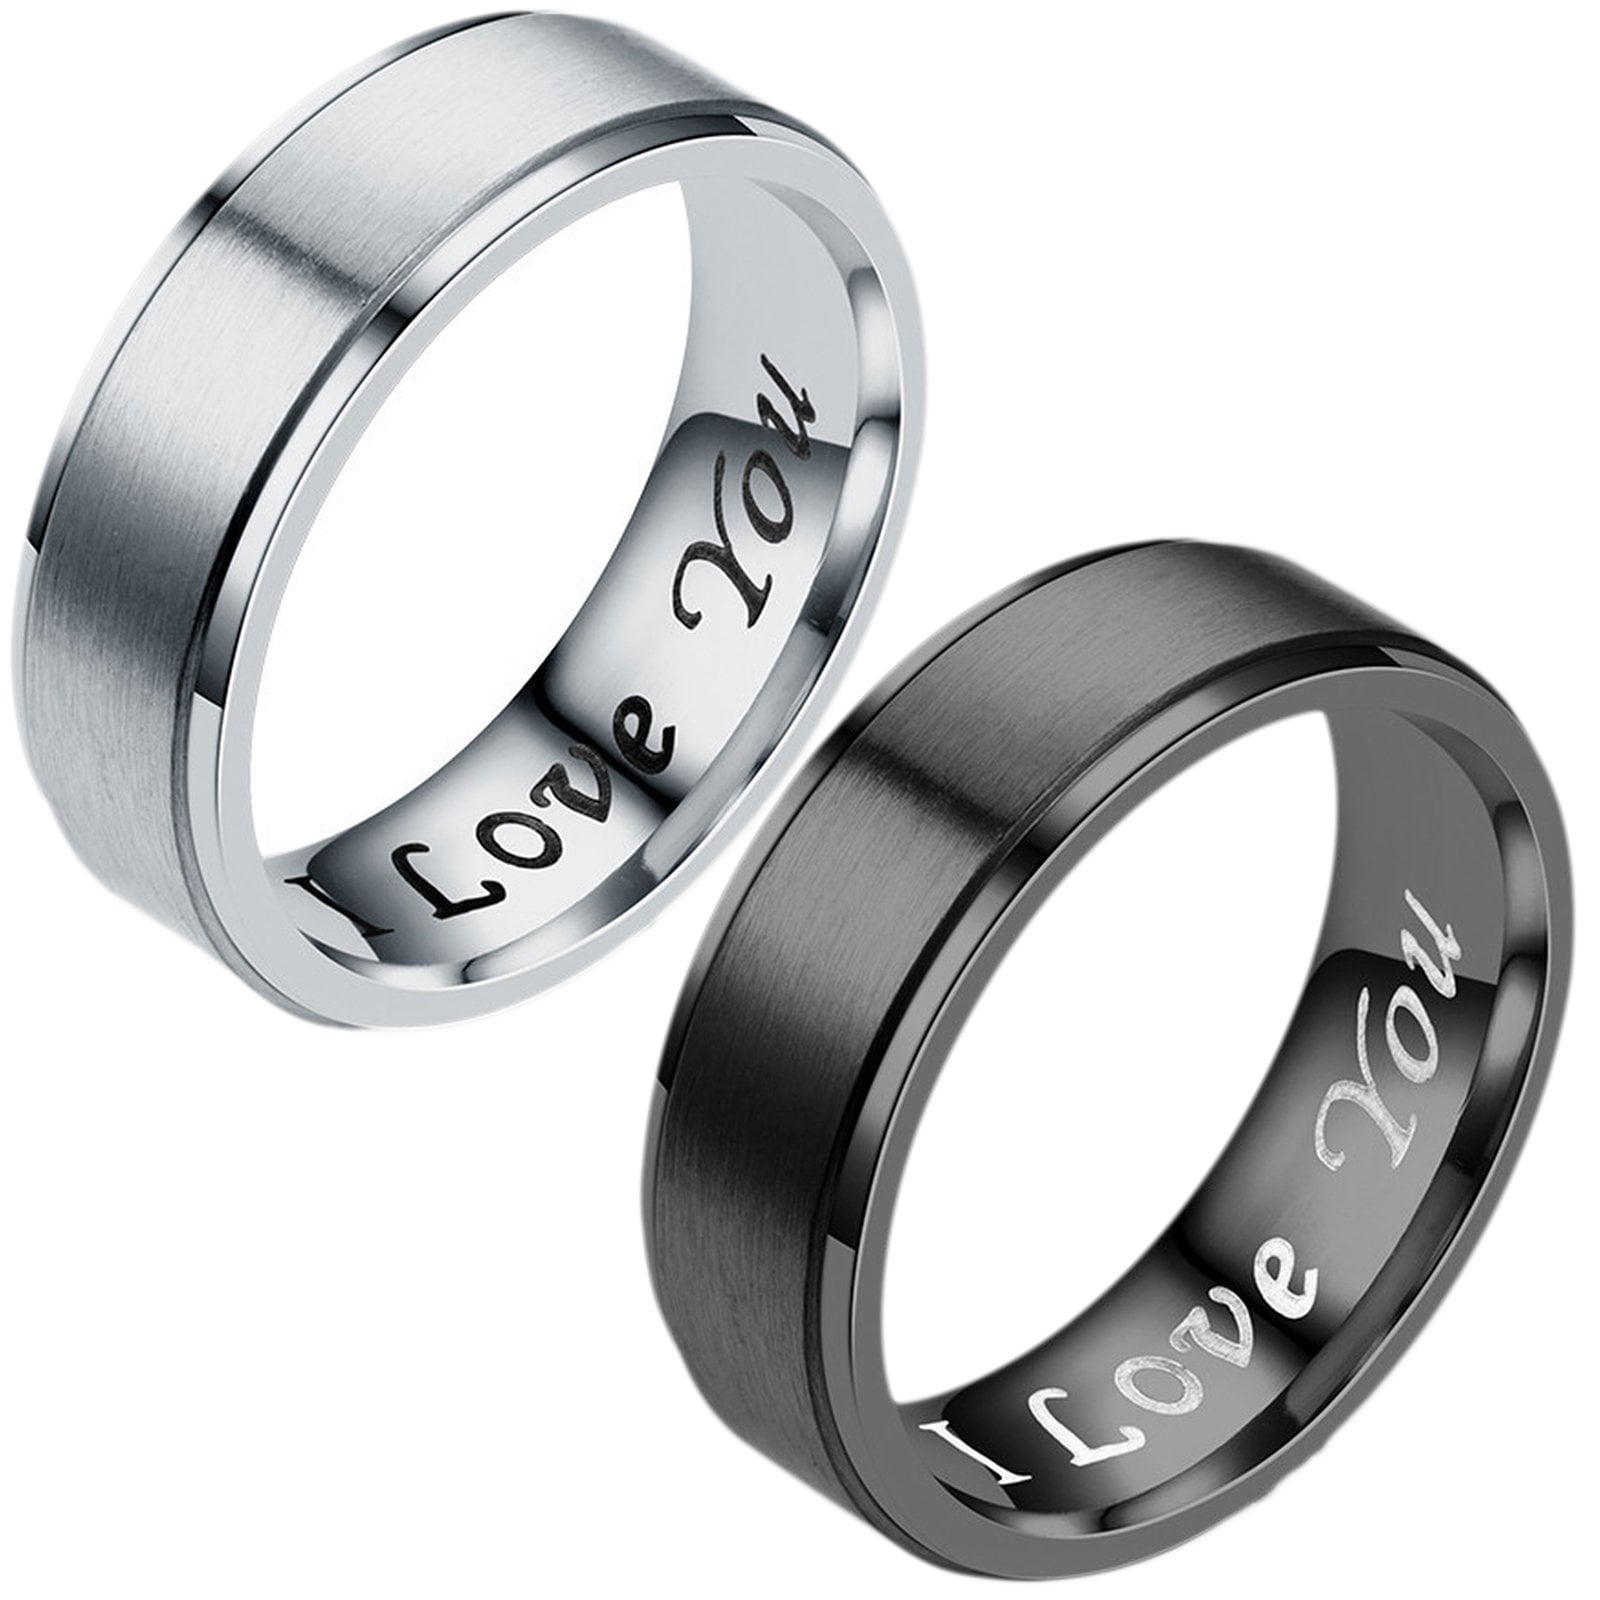 New Mens All Black Stainless Steel DAD Ring Engraved Love You Dad Free Velvet Ring Box